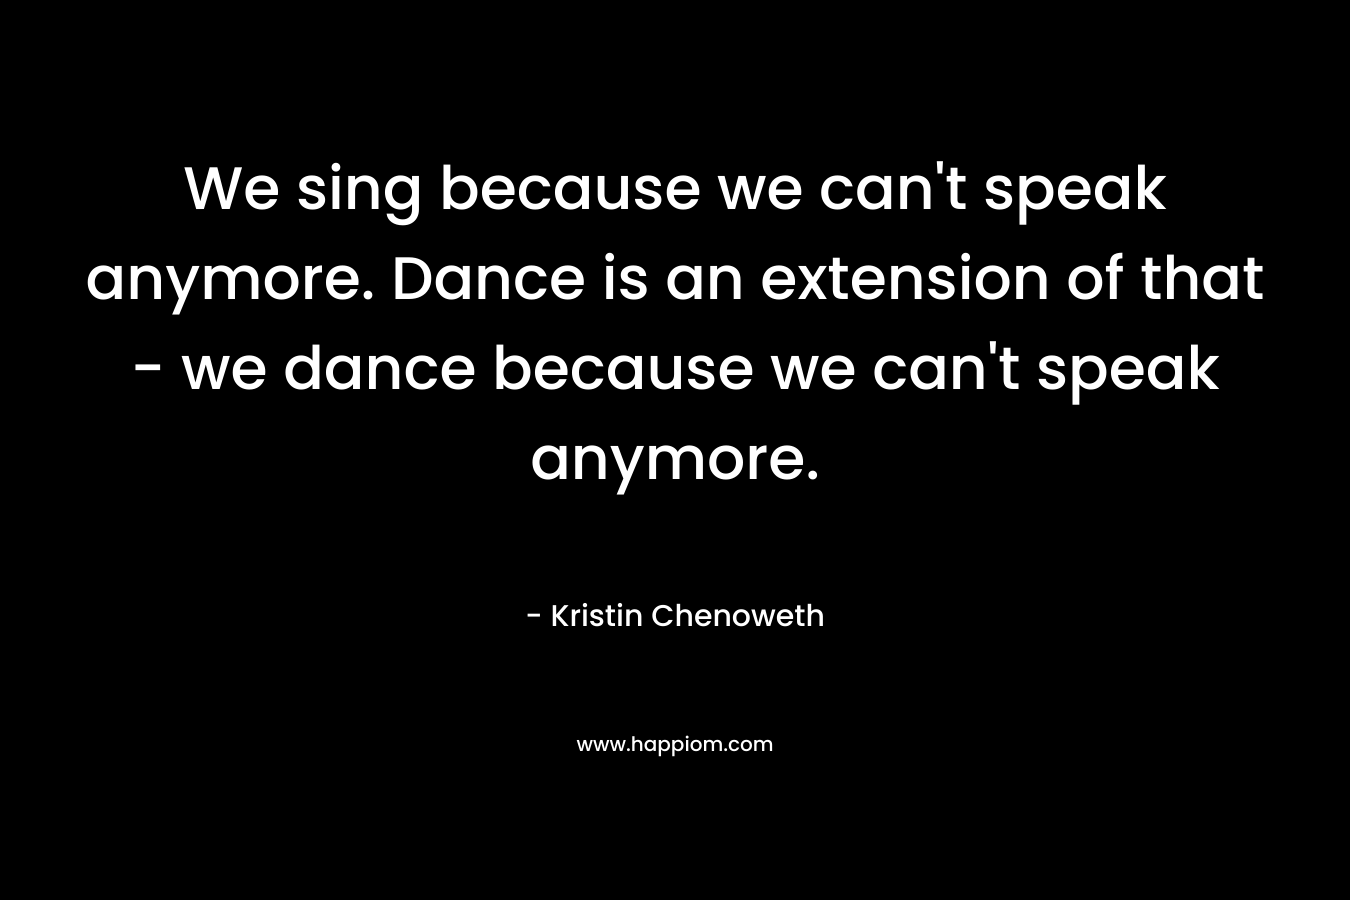 We sing because we can't speak anymore. Dance is an extension of that - we dance because we can't speak anymore.